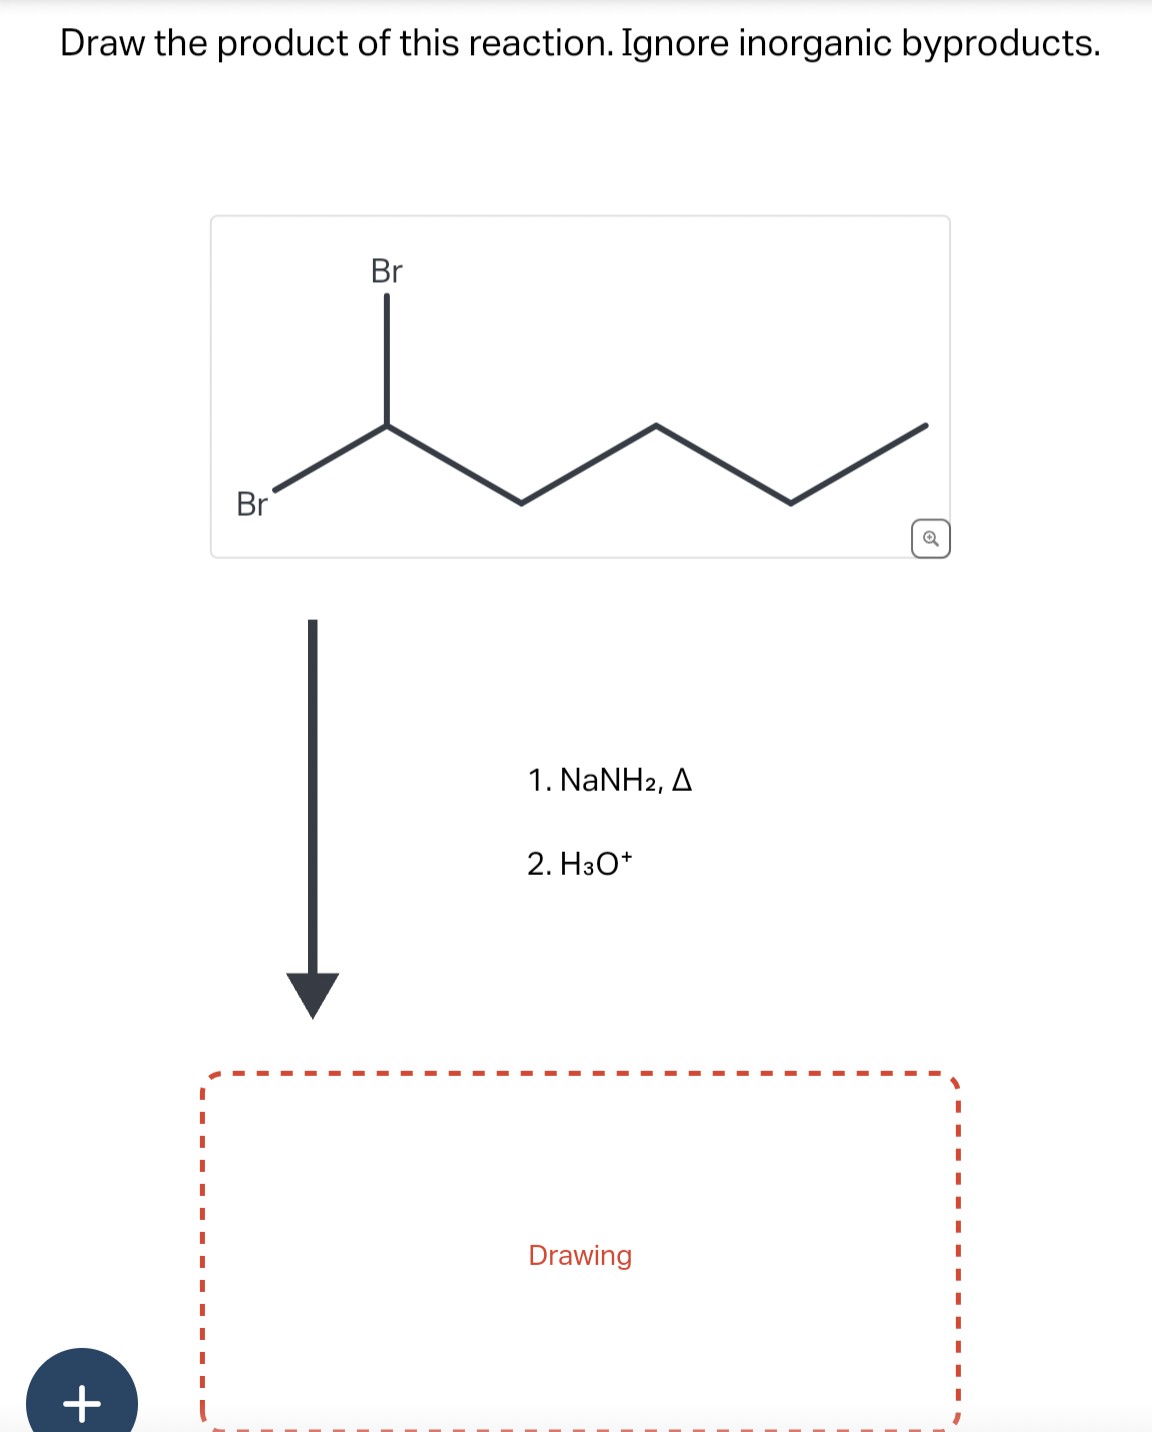 Draw the product of this reaction. Ignore inorganic byproducts.
+
Br
Br
1. NaNH2, A
2. H3O+
Drawing
Q